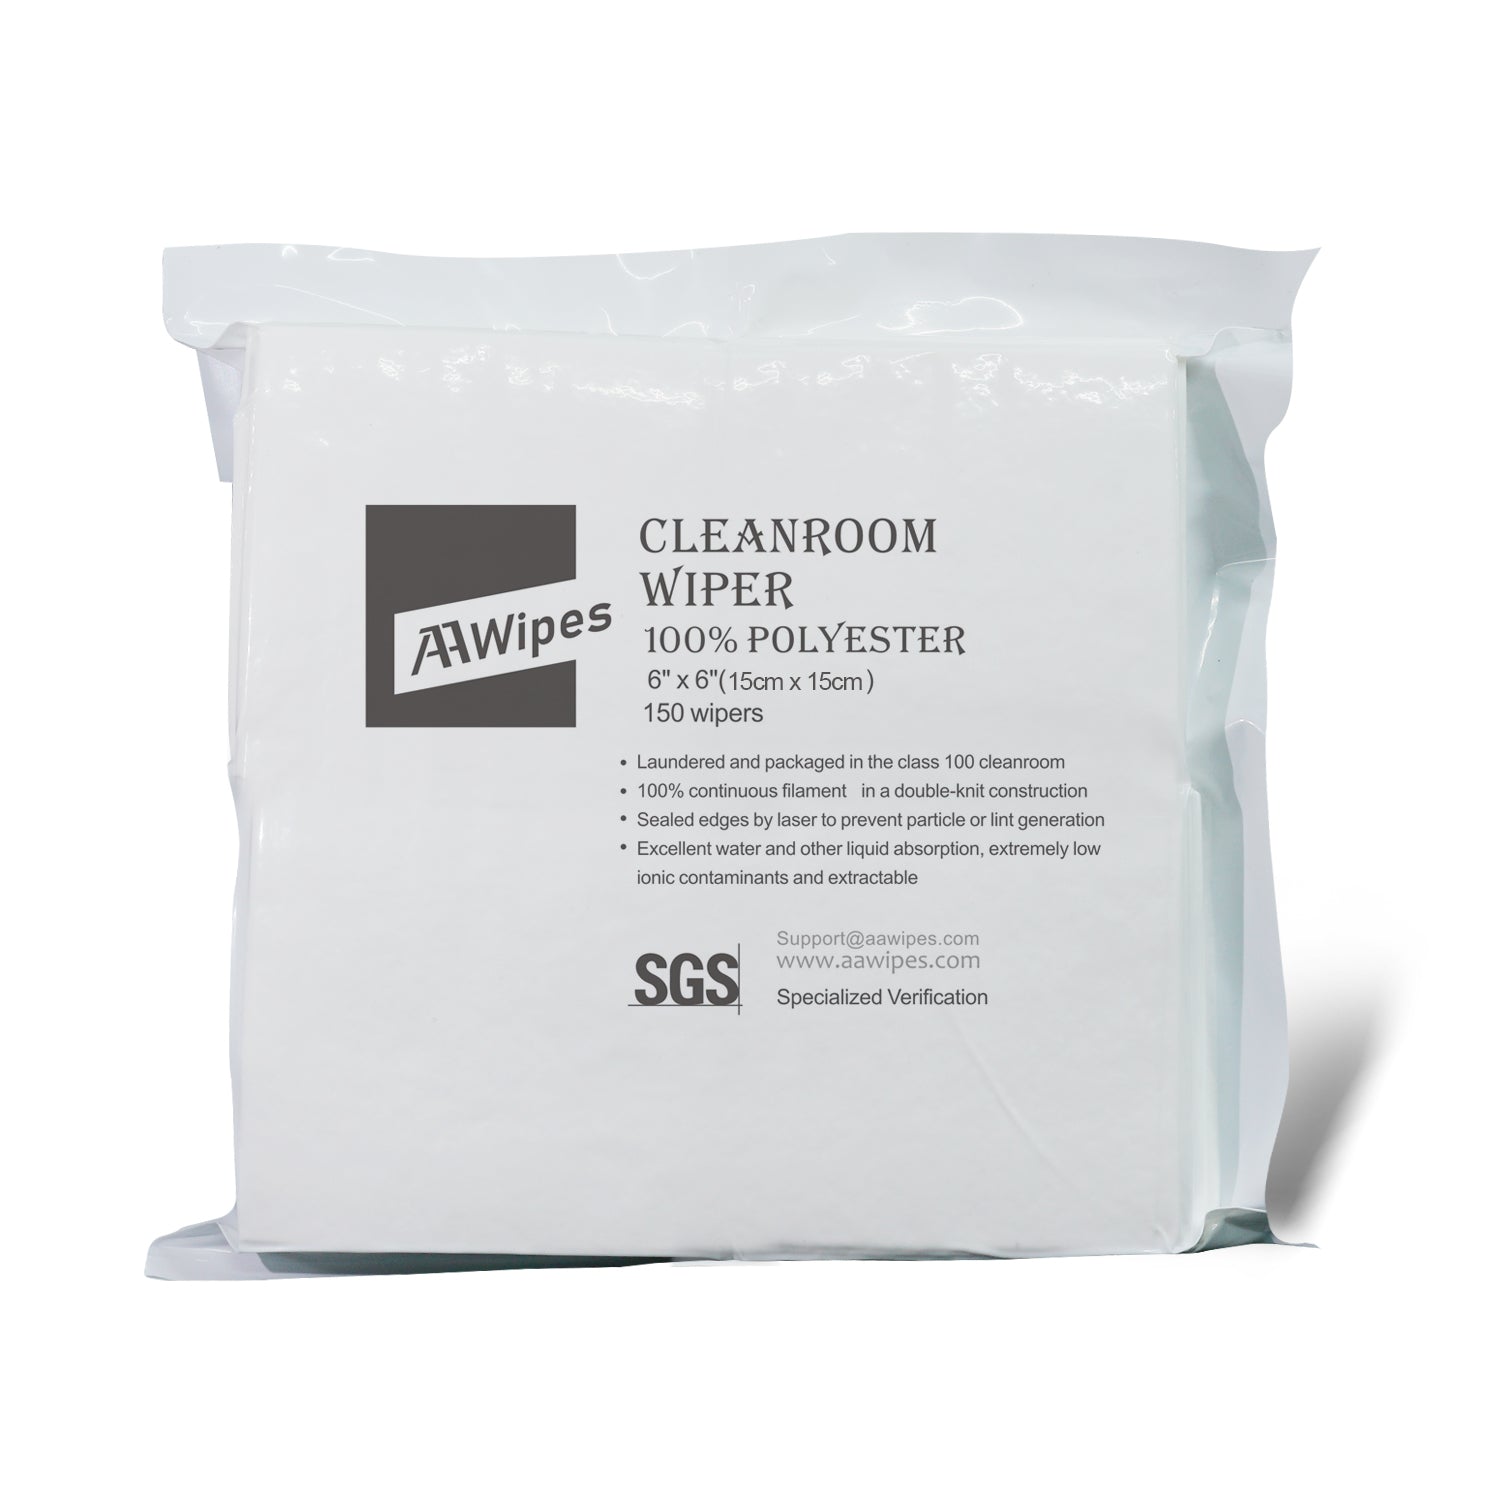 AAwipes Critical Cleanroom Wipes: 6"x6" Double Knit, 100% Polyester. Pharmaceutical-grade, 6,000 wipes/box, 40 bags (No. CP14006).